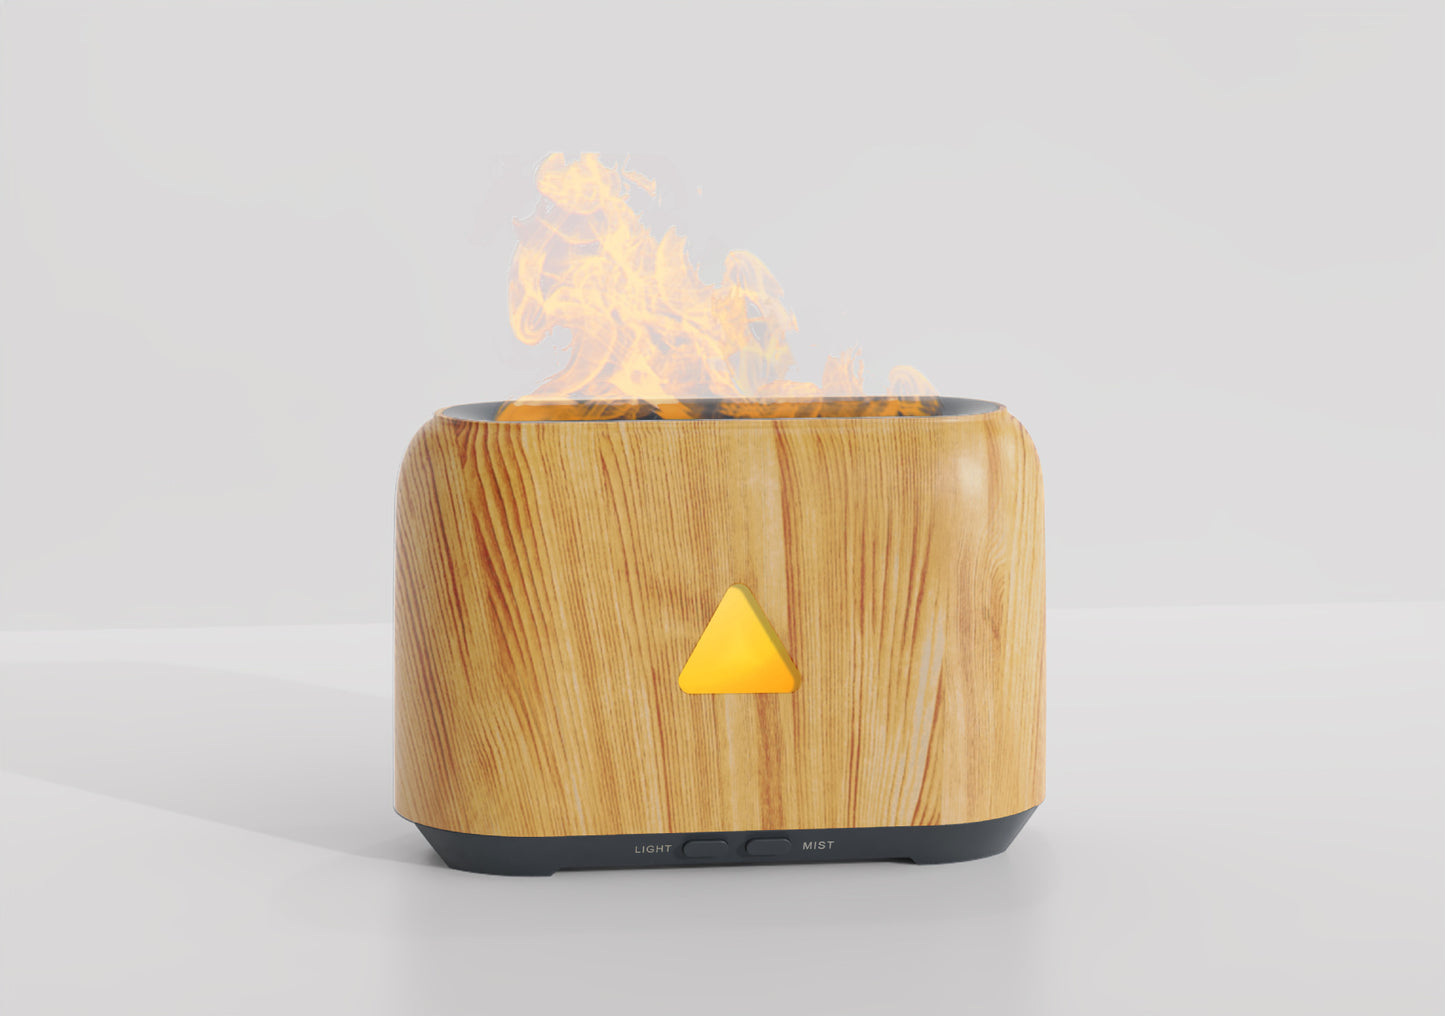 150ml Wood Grain Aroma Diffuser 5V Hollow Flame Humidifier Flame Atmosphere Light USB Volcano Aroma Diffuser